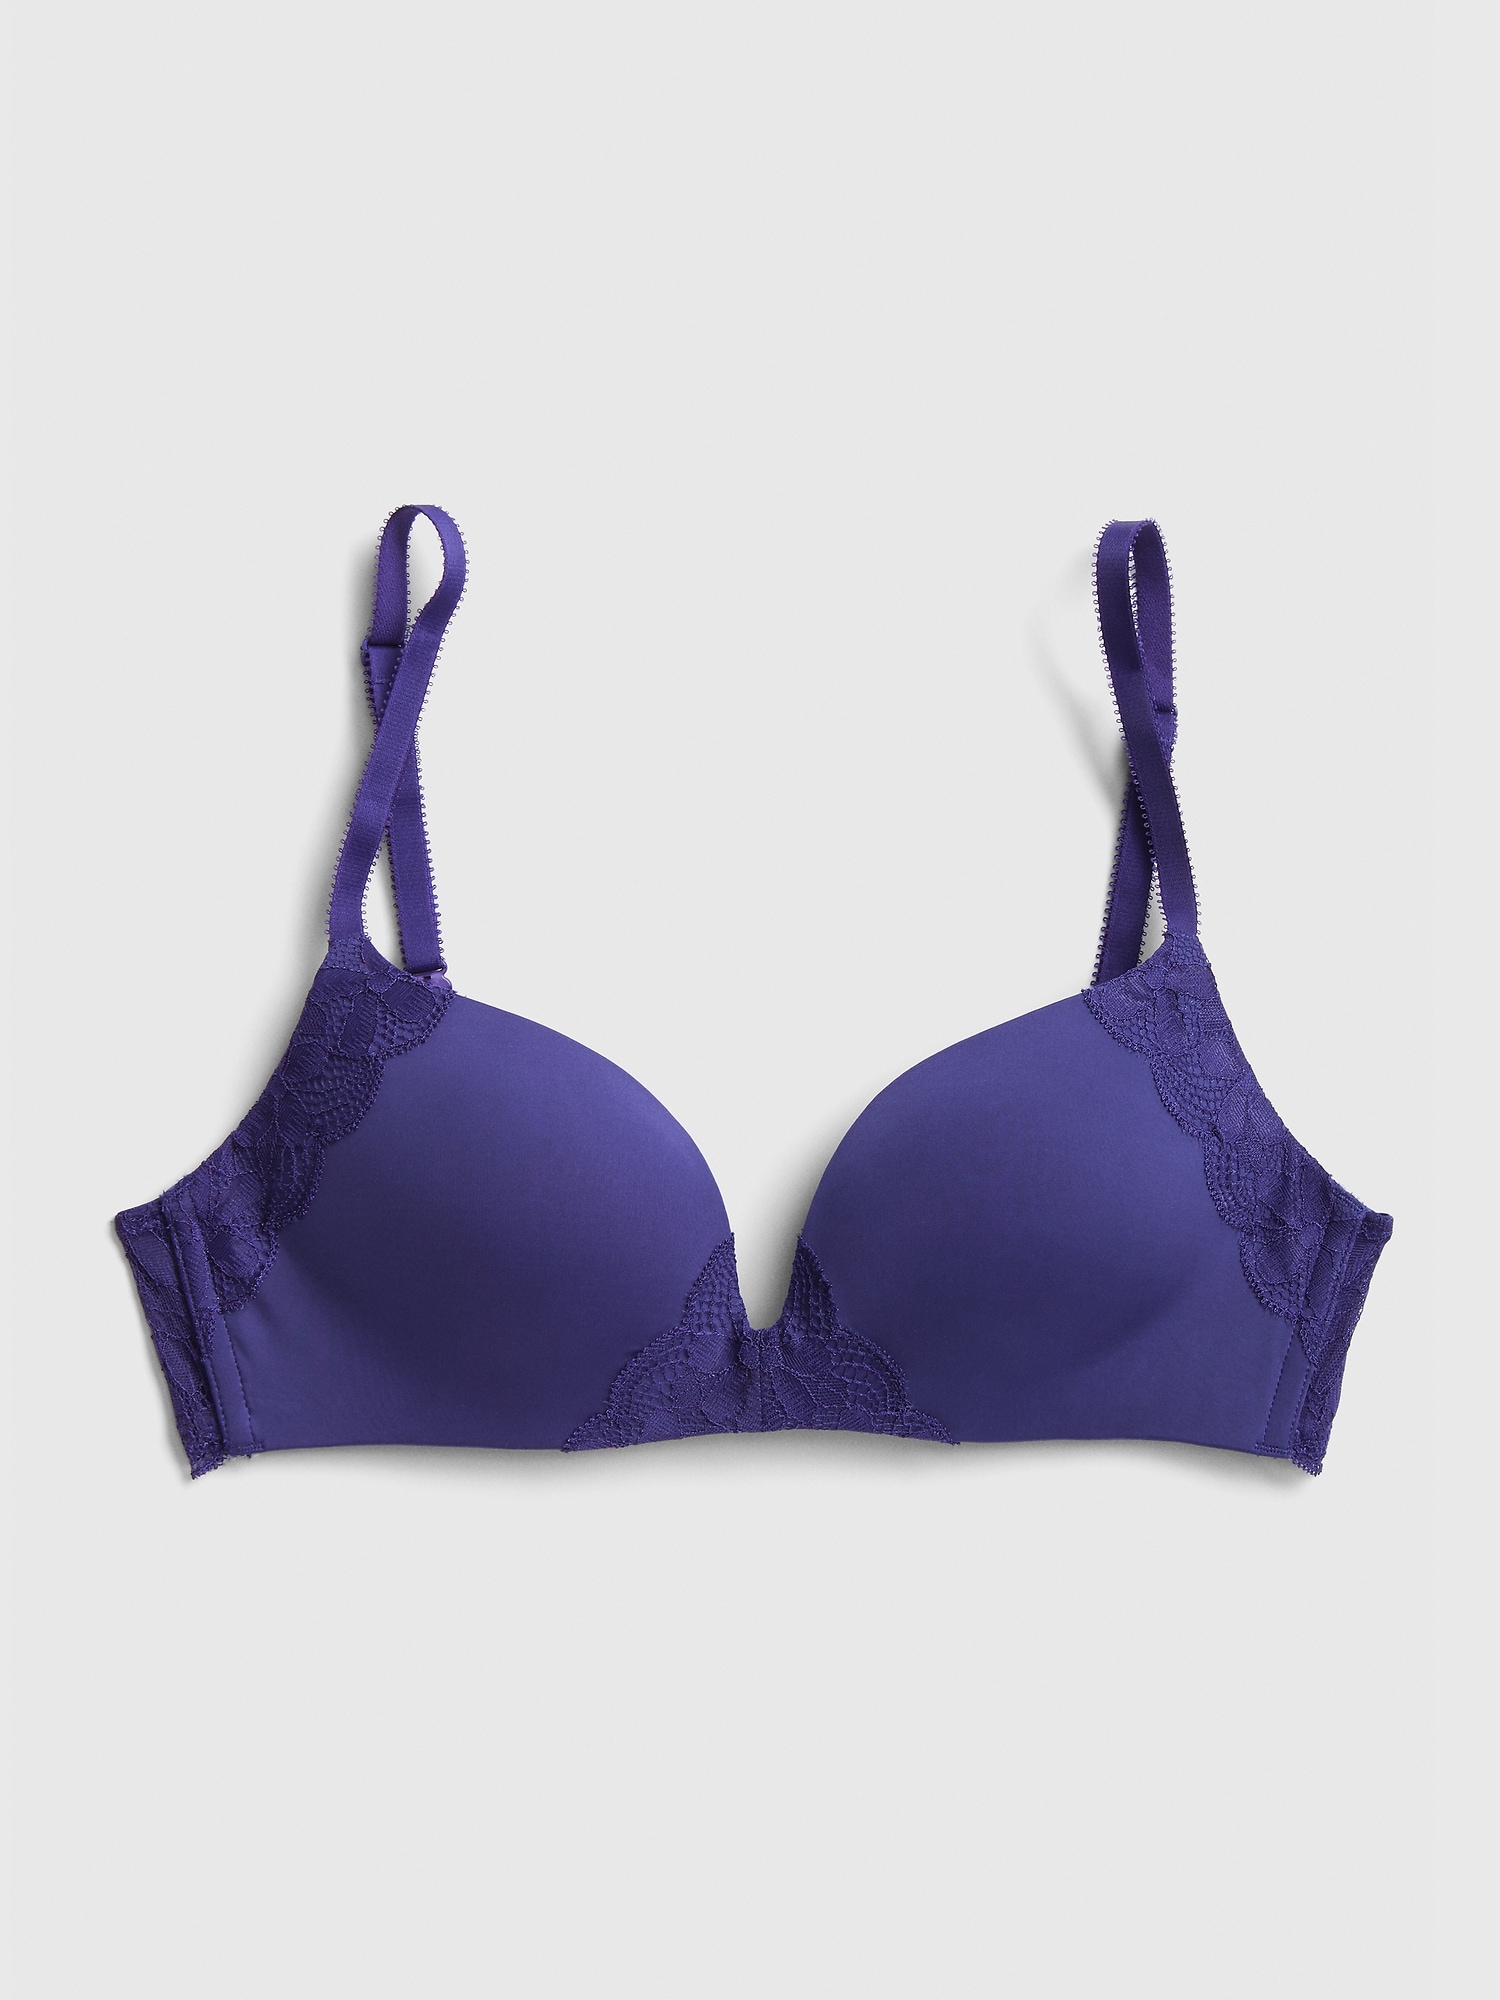 This Bra Gives You An Attractive Look Everywhere. 